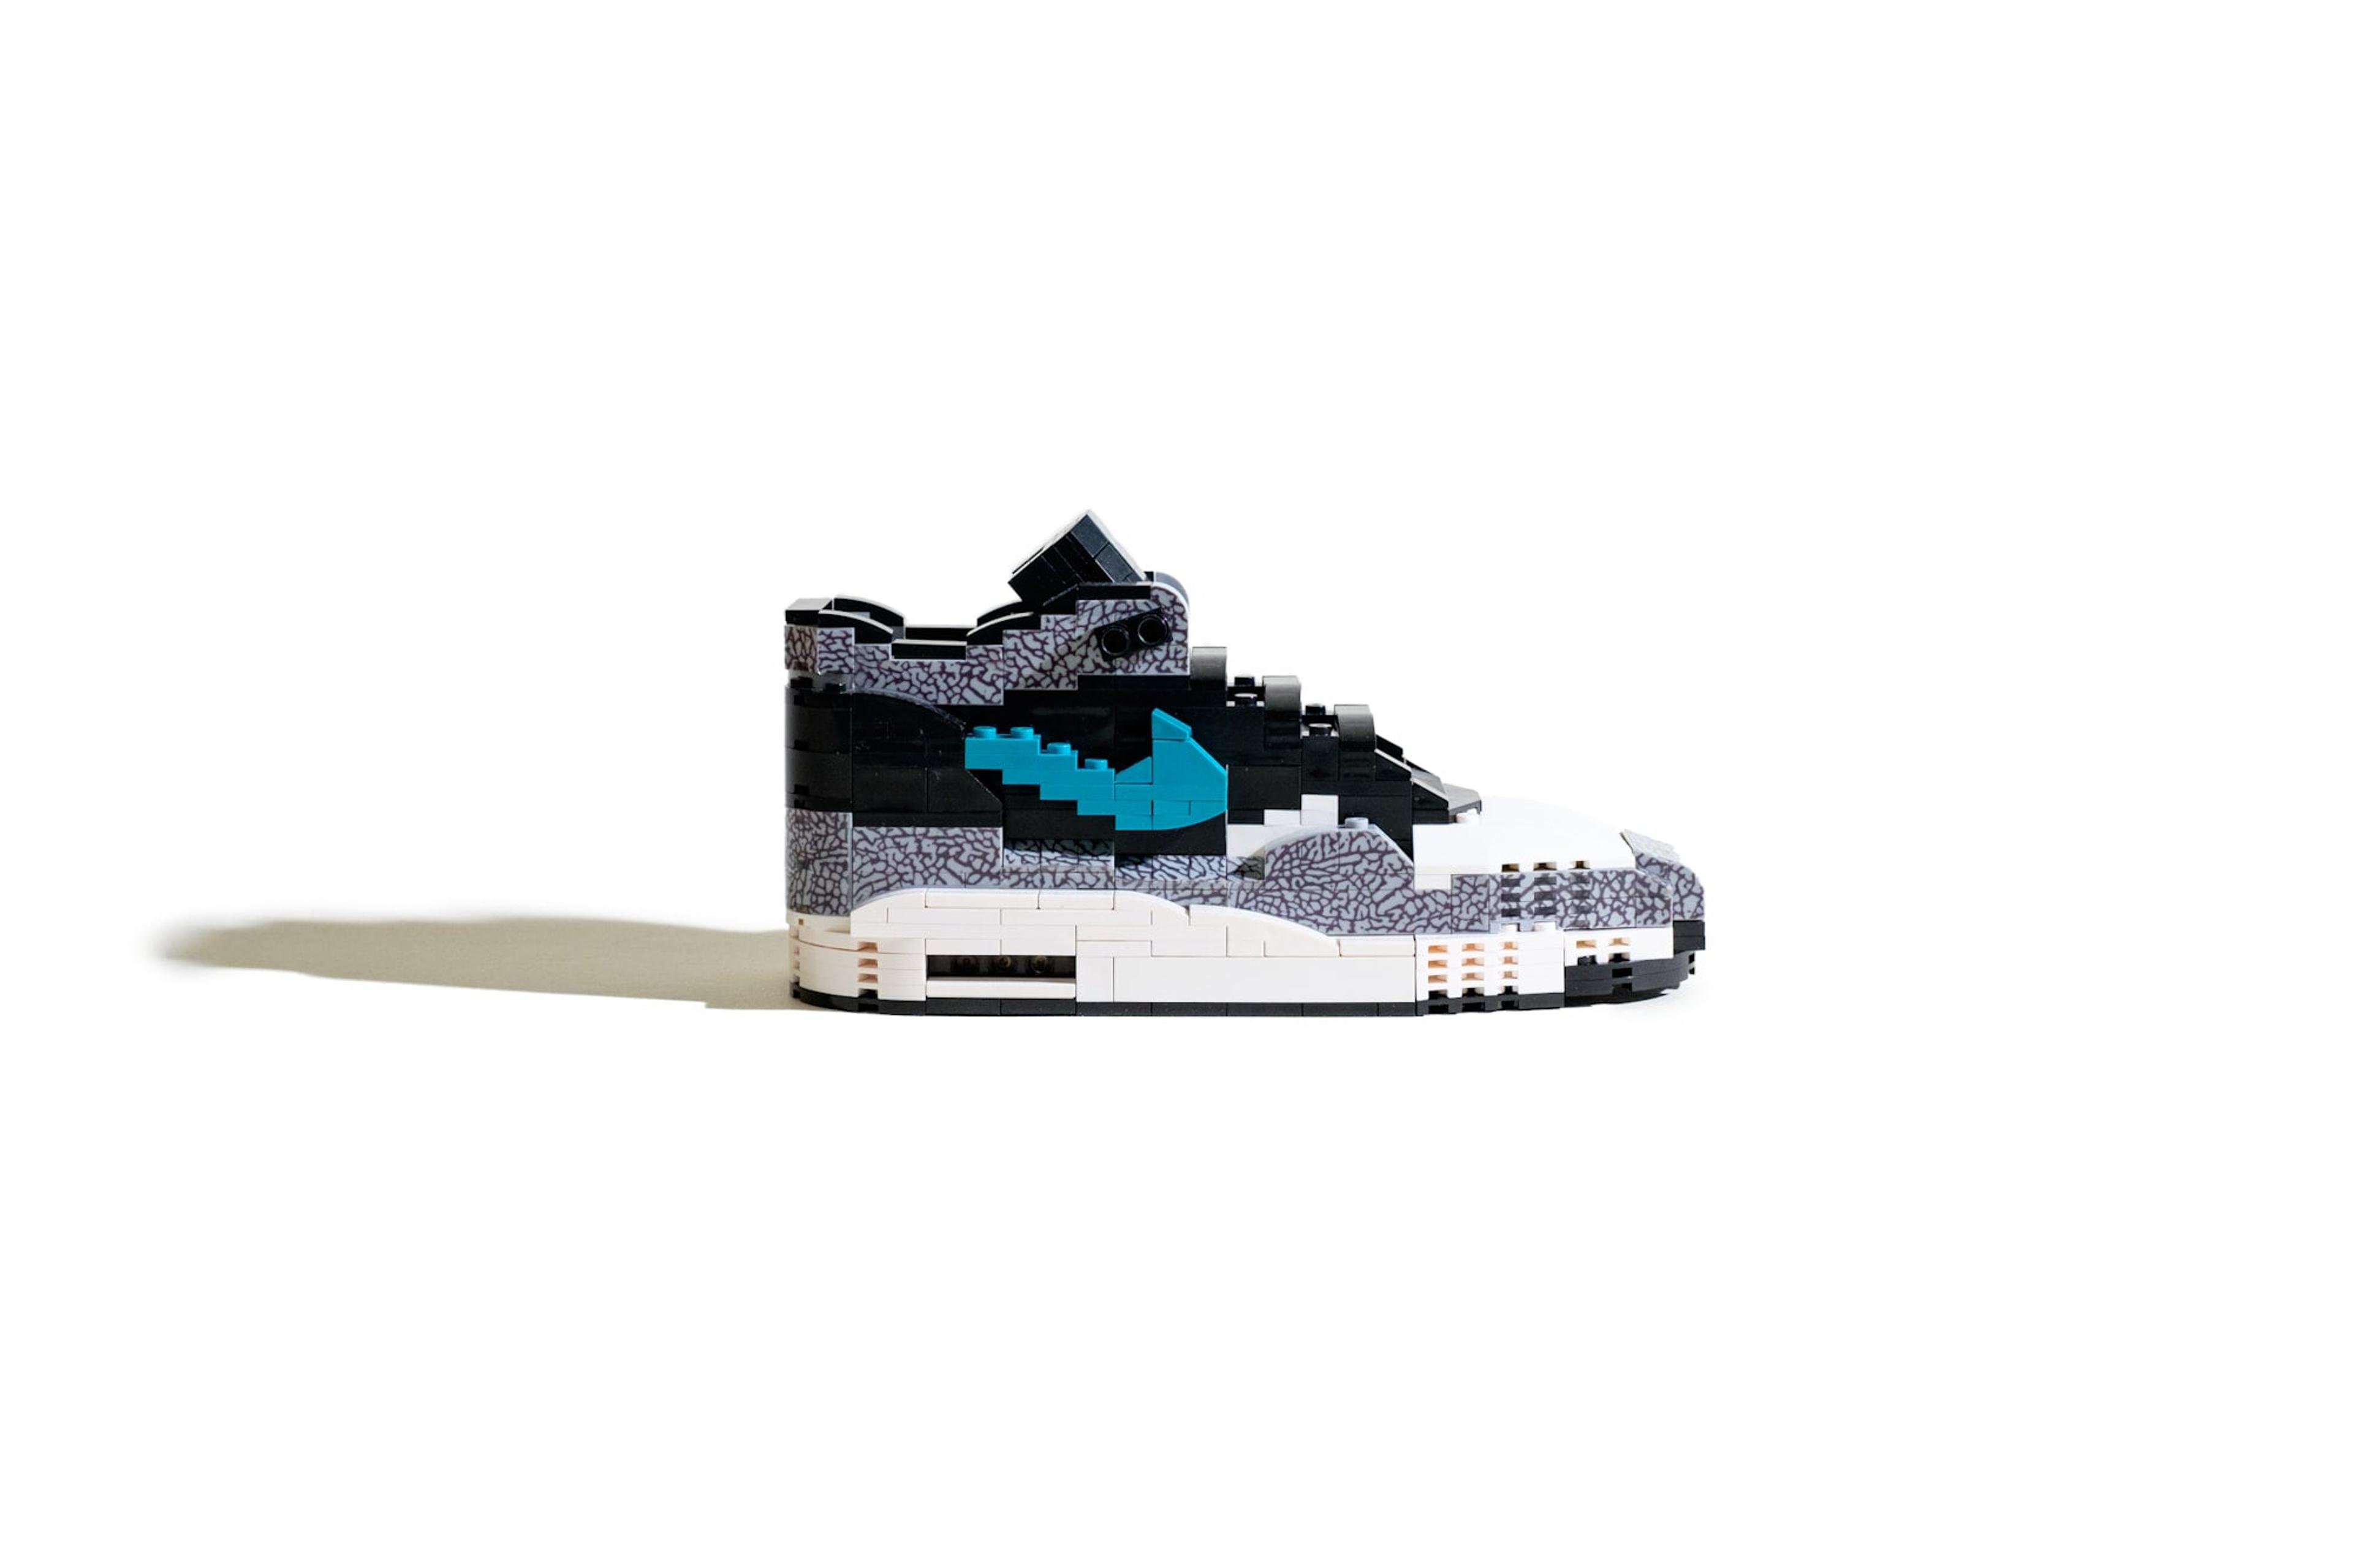 NETMAGNETISM SERIES 5 V - AM1 Atmos Cement 2021